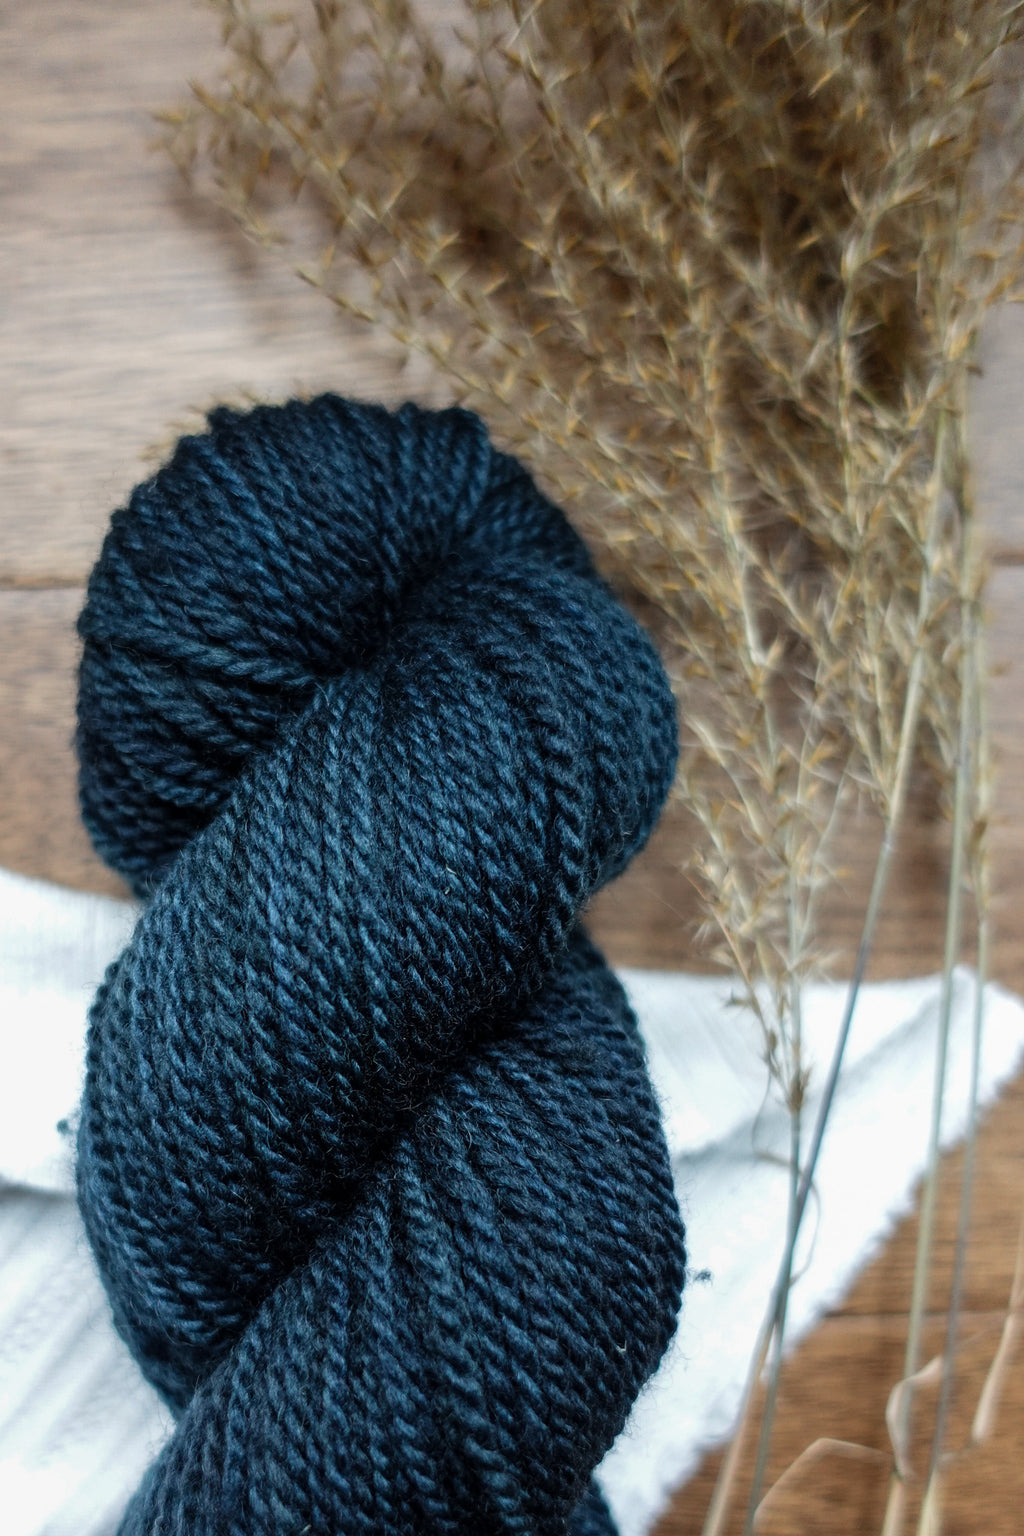 A DK weight skein of deep blue yarn lays on a tabletop next to dried grasses.